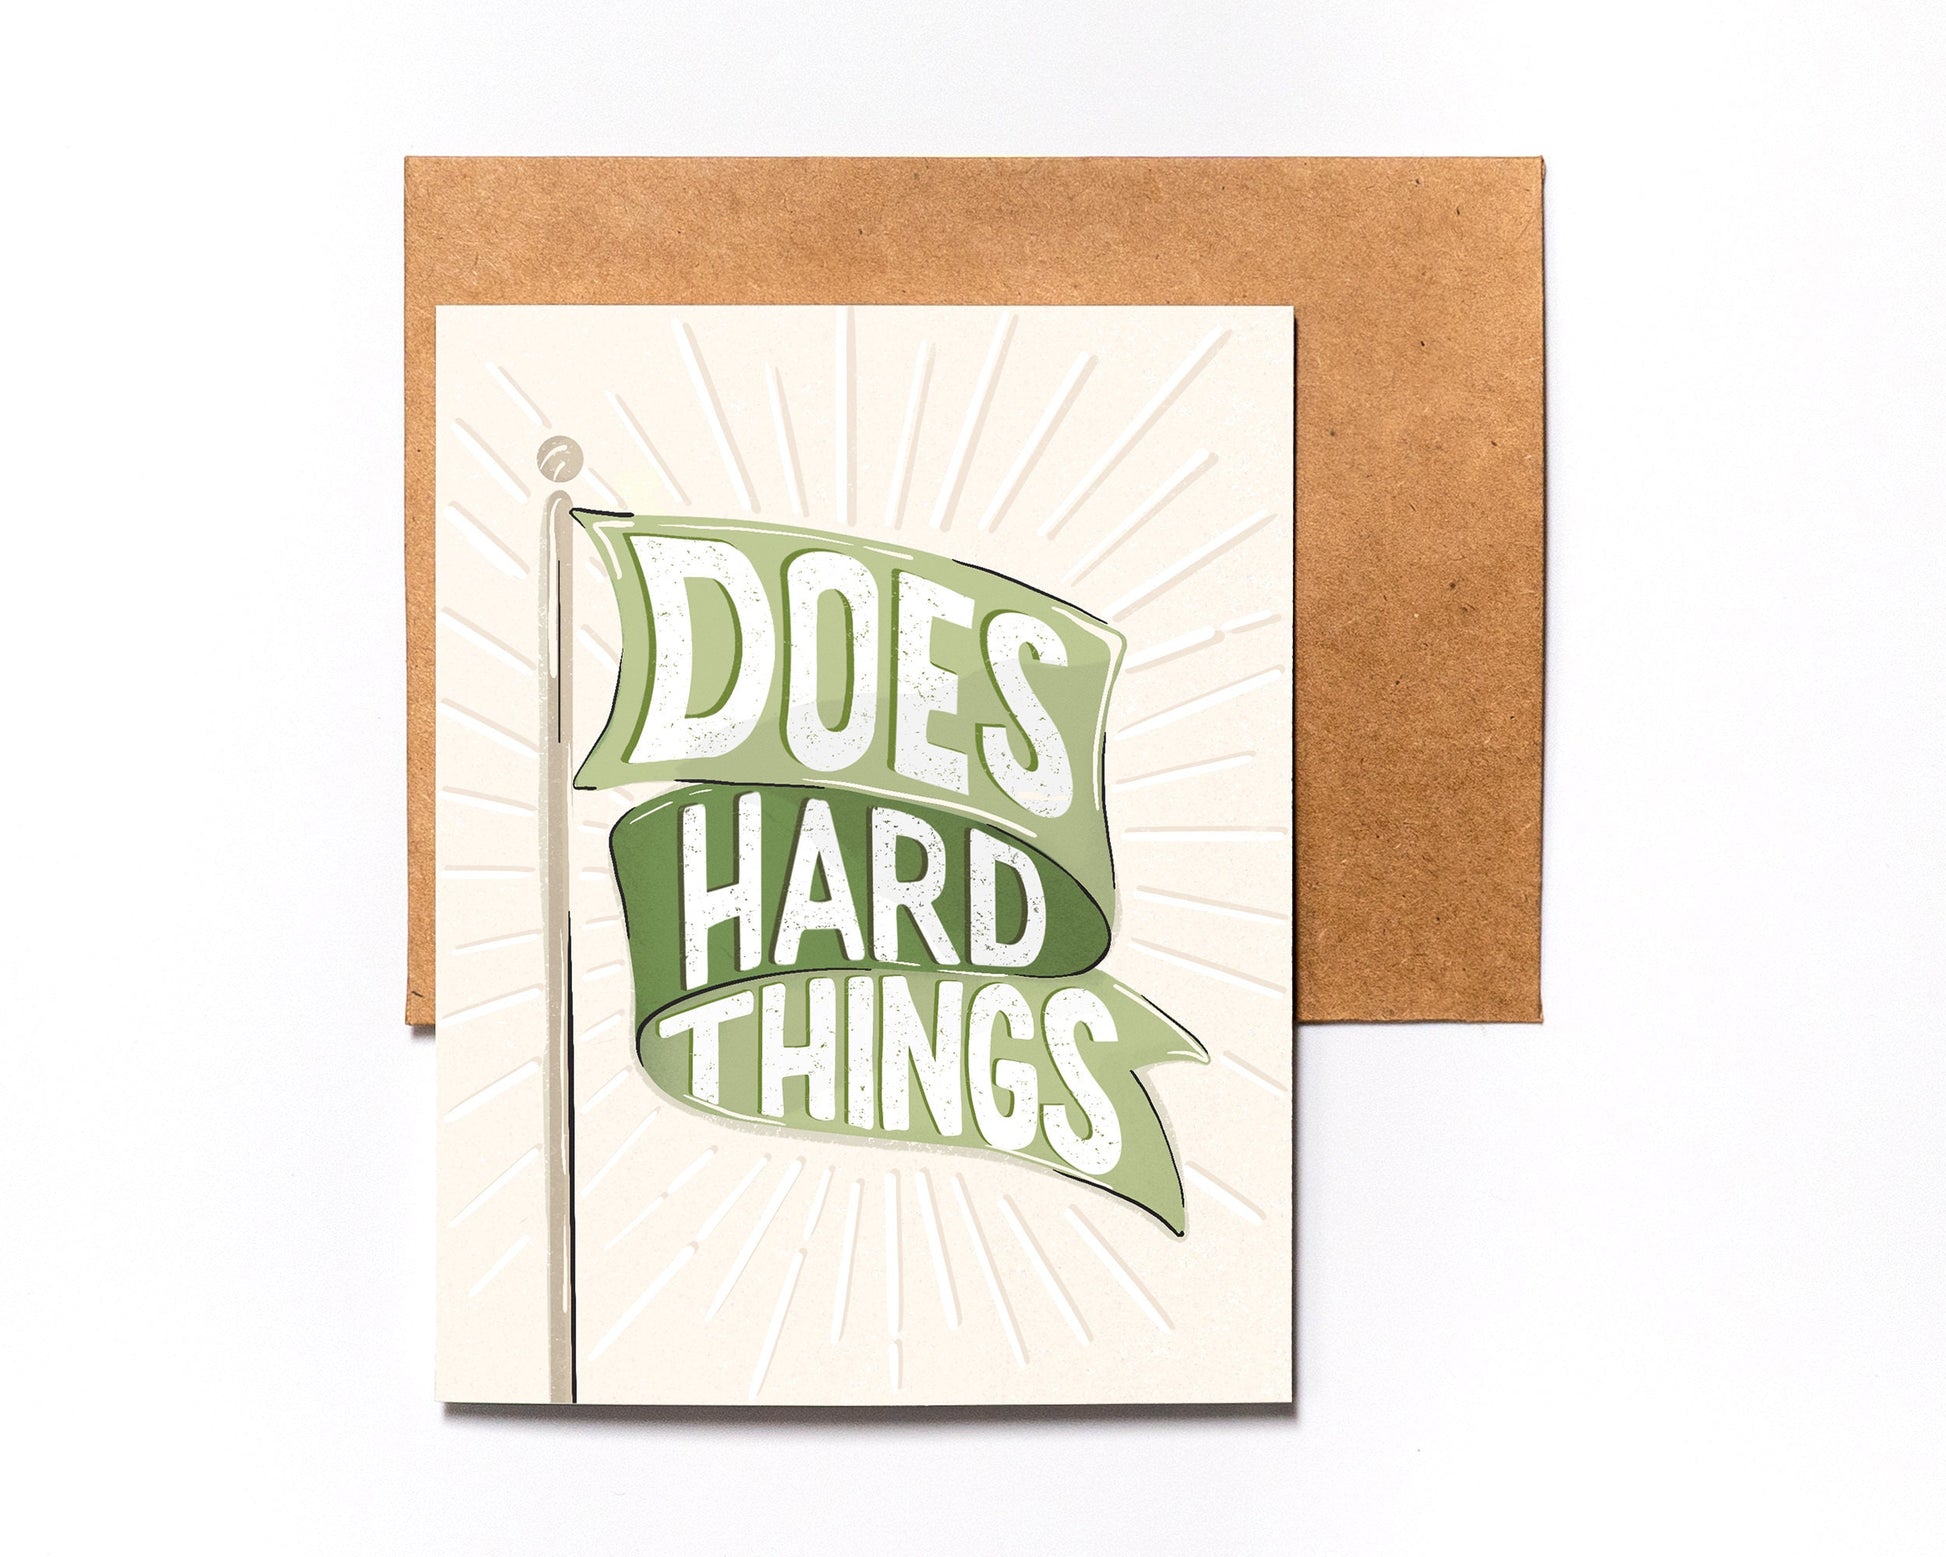 Green Flag Greeting Card - Does Hard Things - Over Achiever - Achievement - For Friend - Just Because - Congrats - Encouragement - Grad